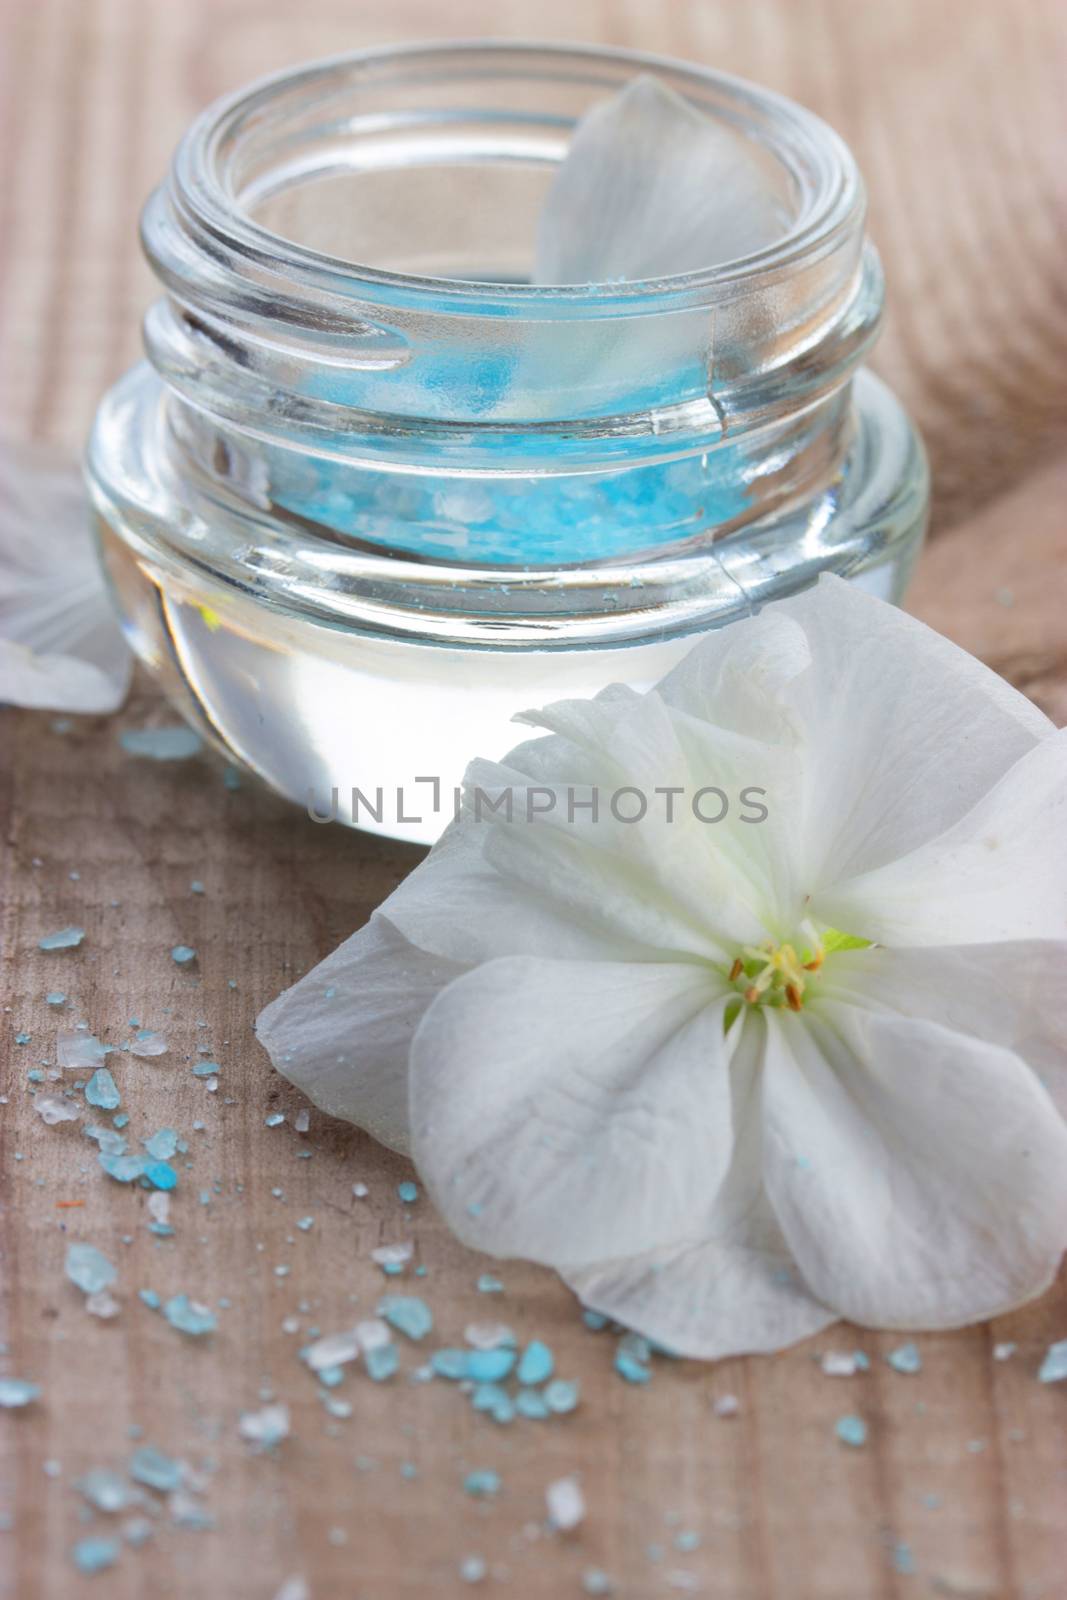 Spa beauty product. sea sult. shells and flowers